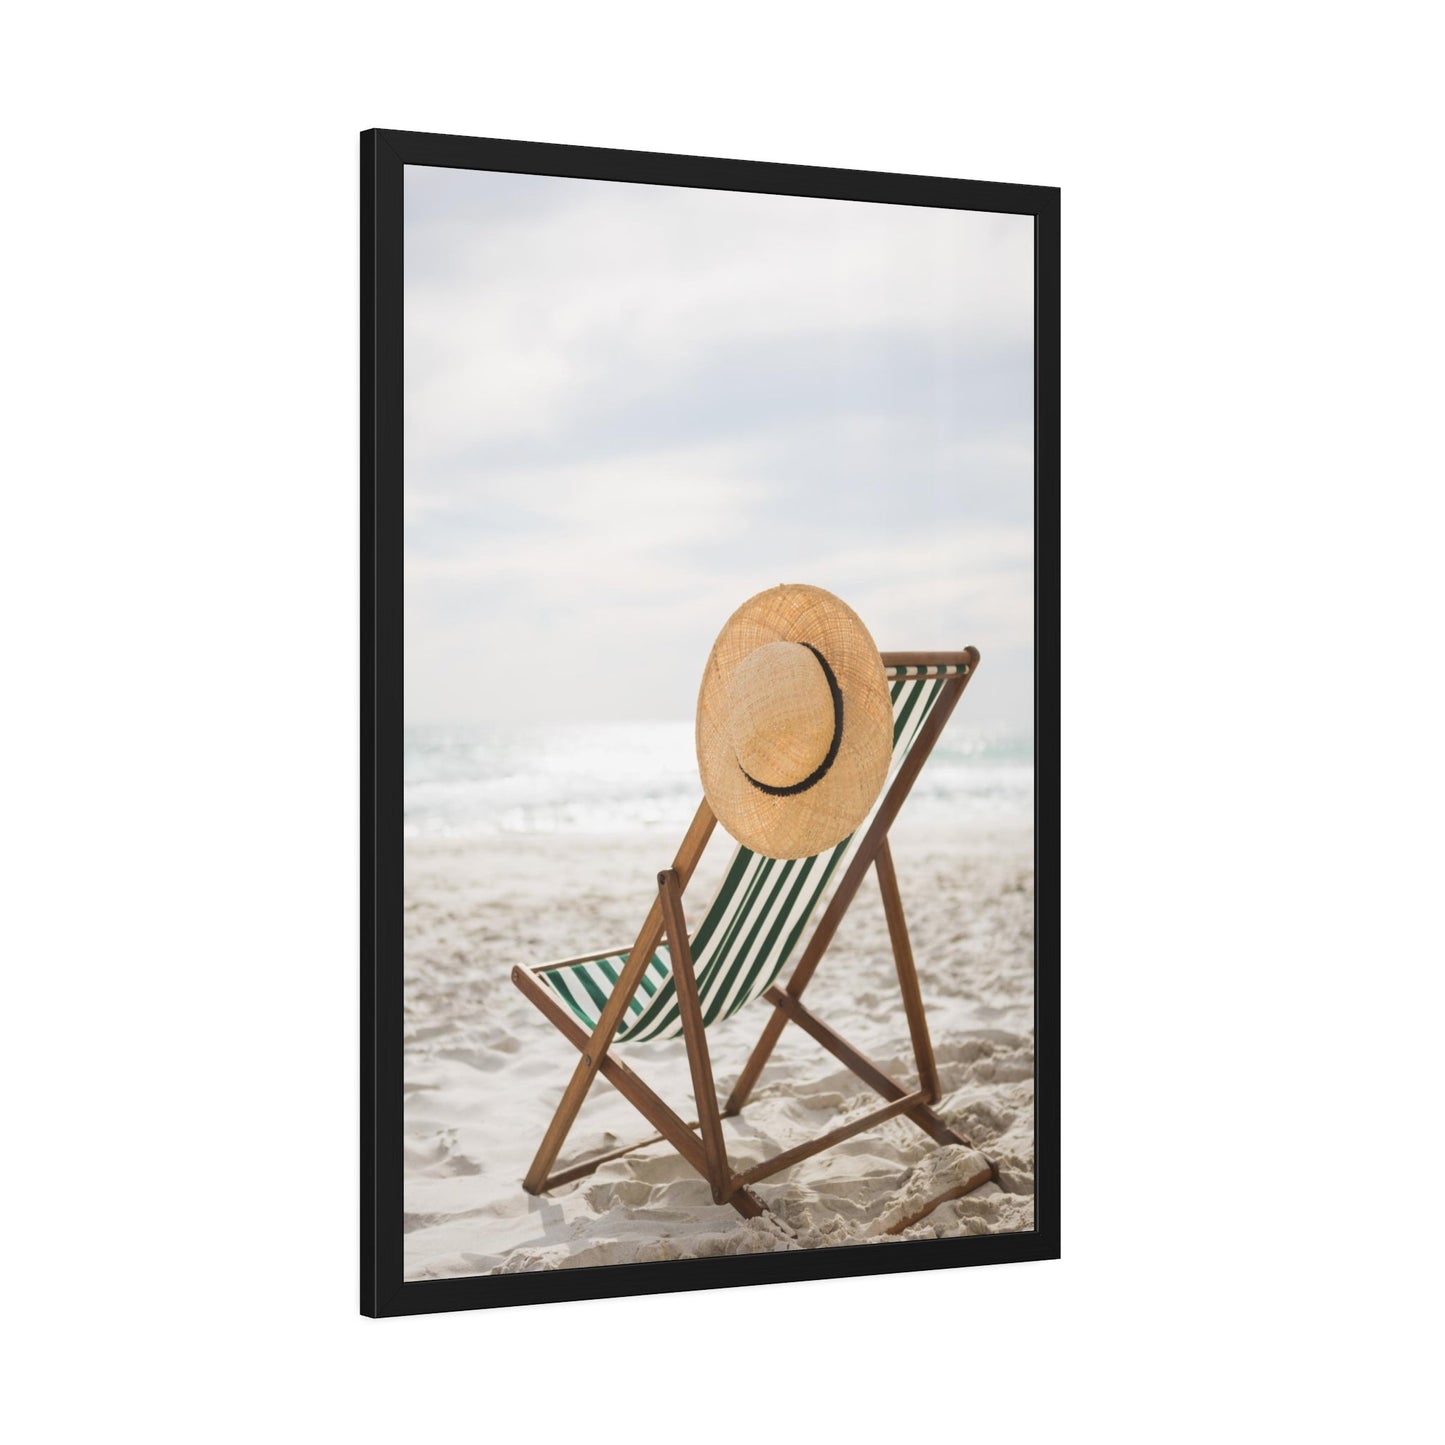 Unwind and Destress: Framed Poster for a Relaxing Retreat